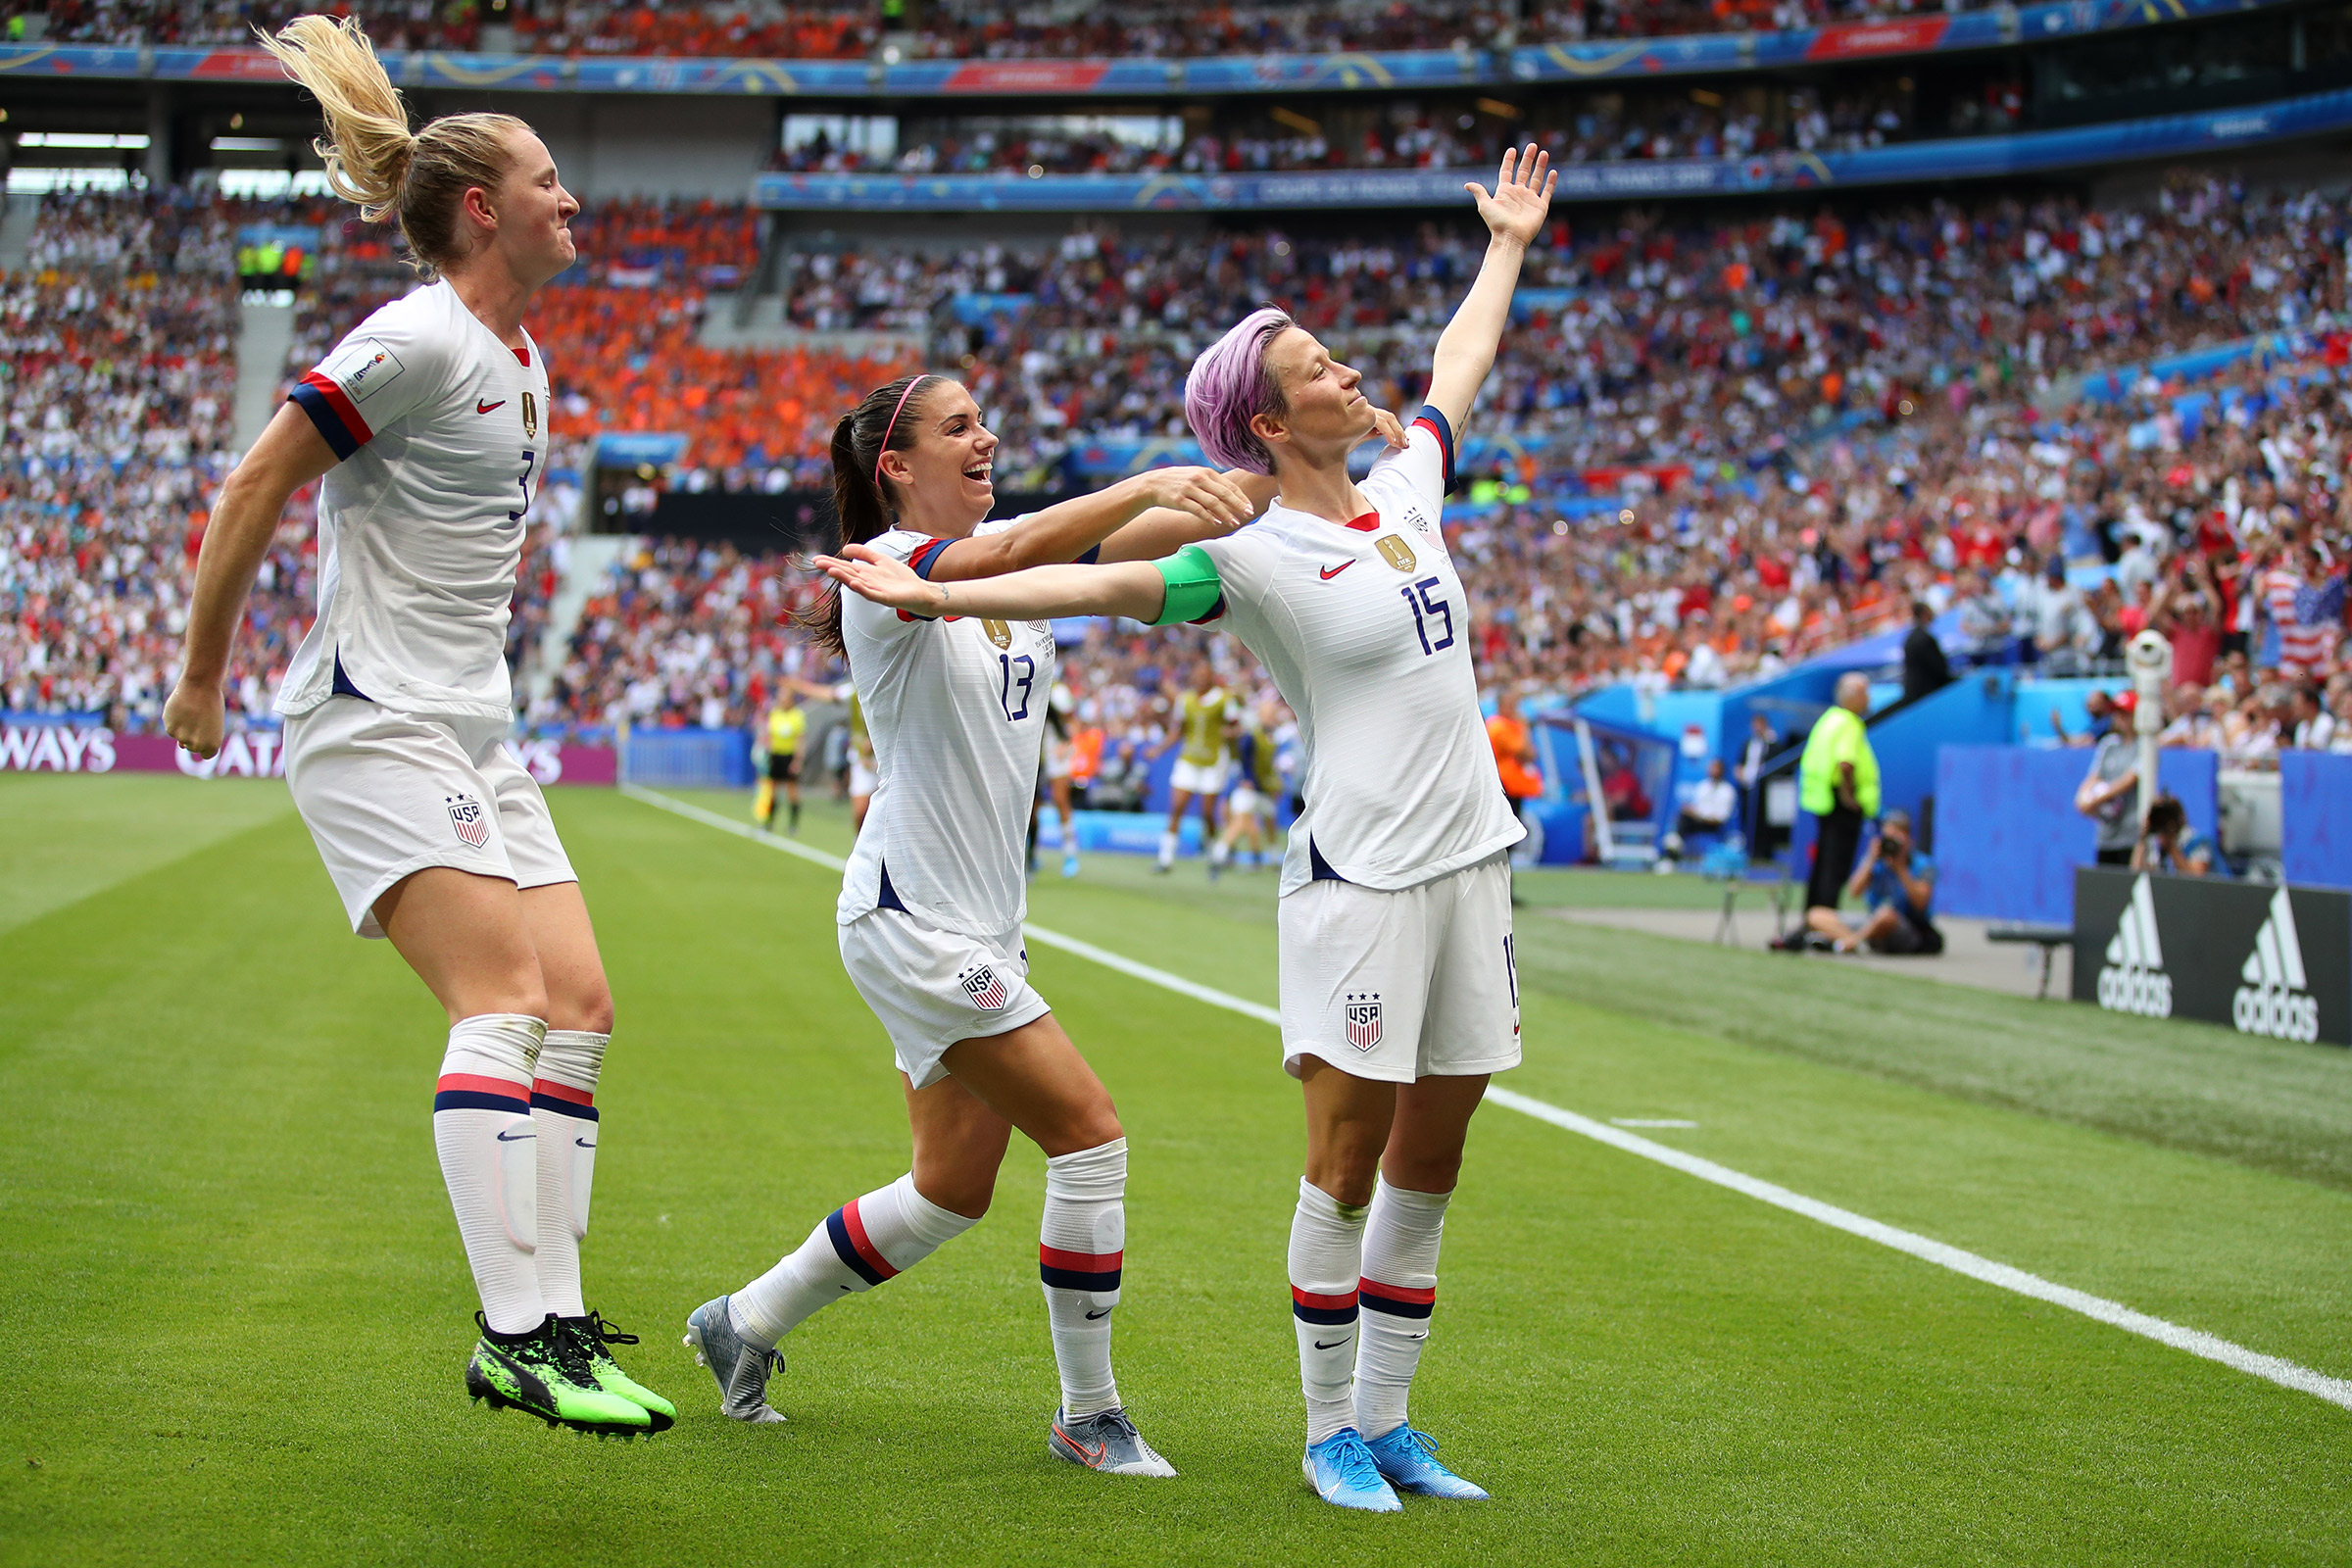 Megan Rapinoe strikes a pose after scoring in the 2019 World Cup Final